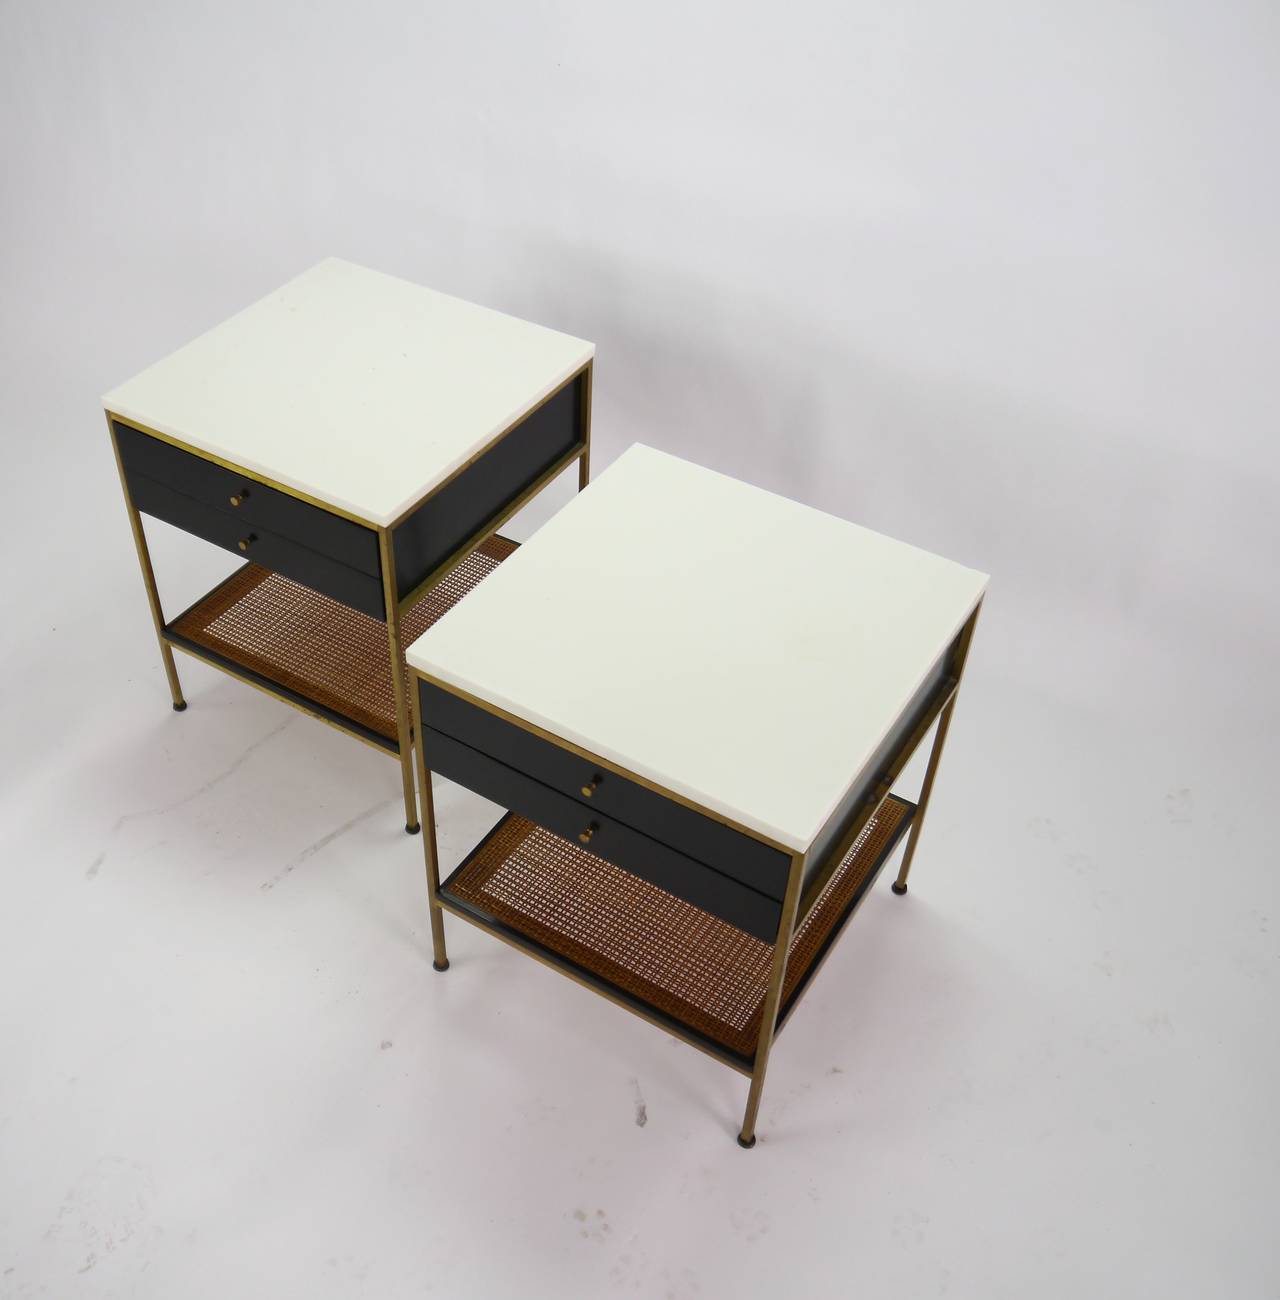 20th Century Pair of Paul McCobb Irwin Collection Nightstands with Vitrolite Tops